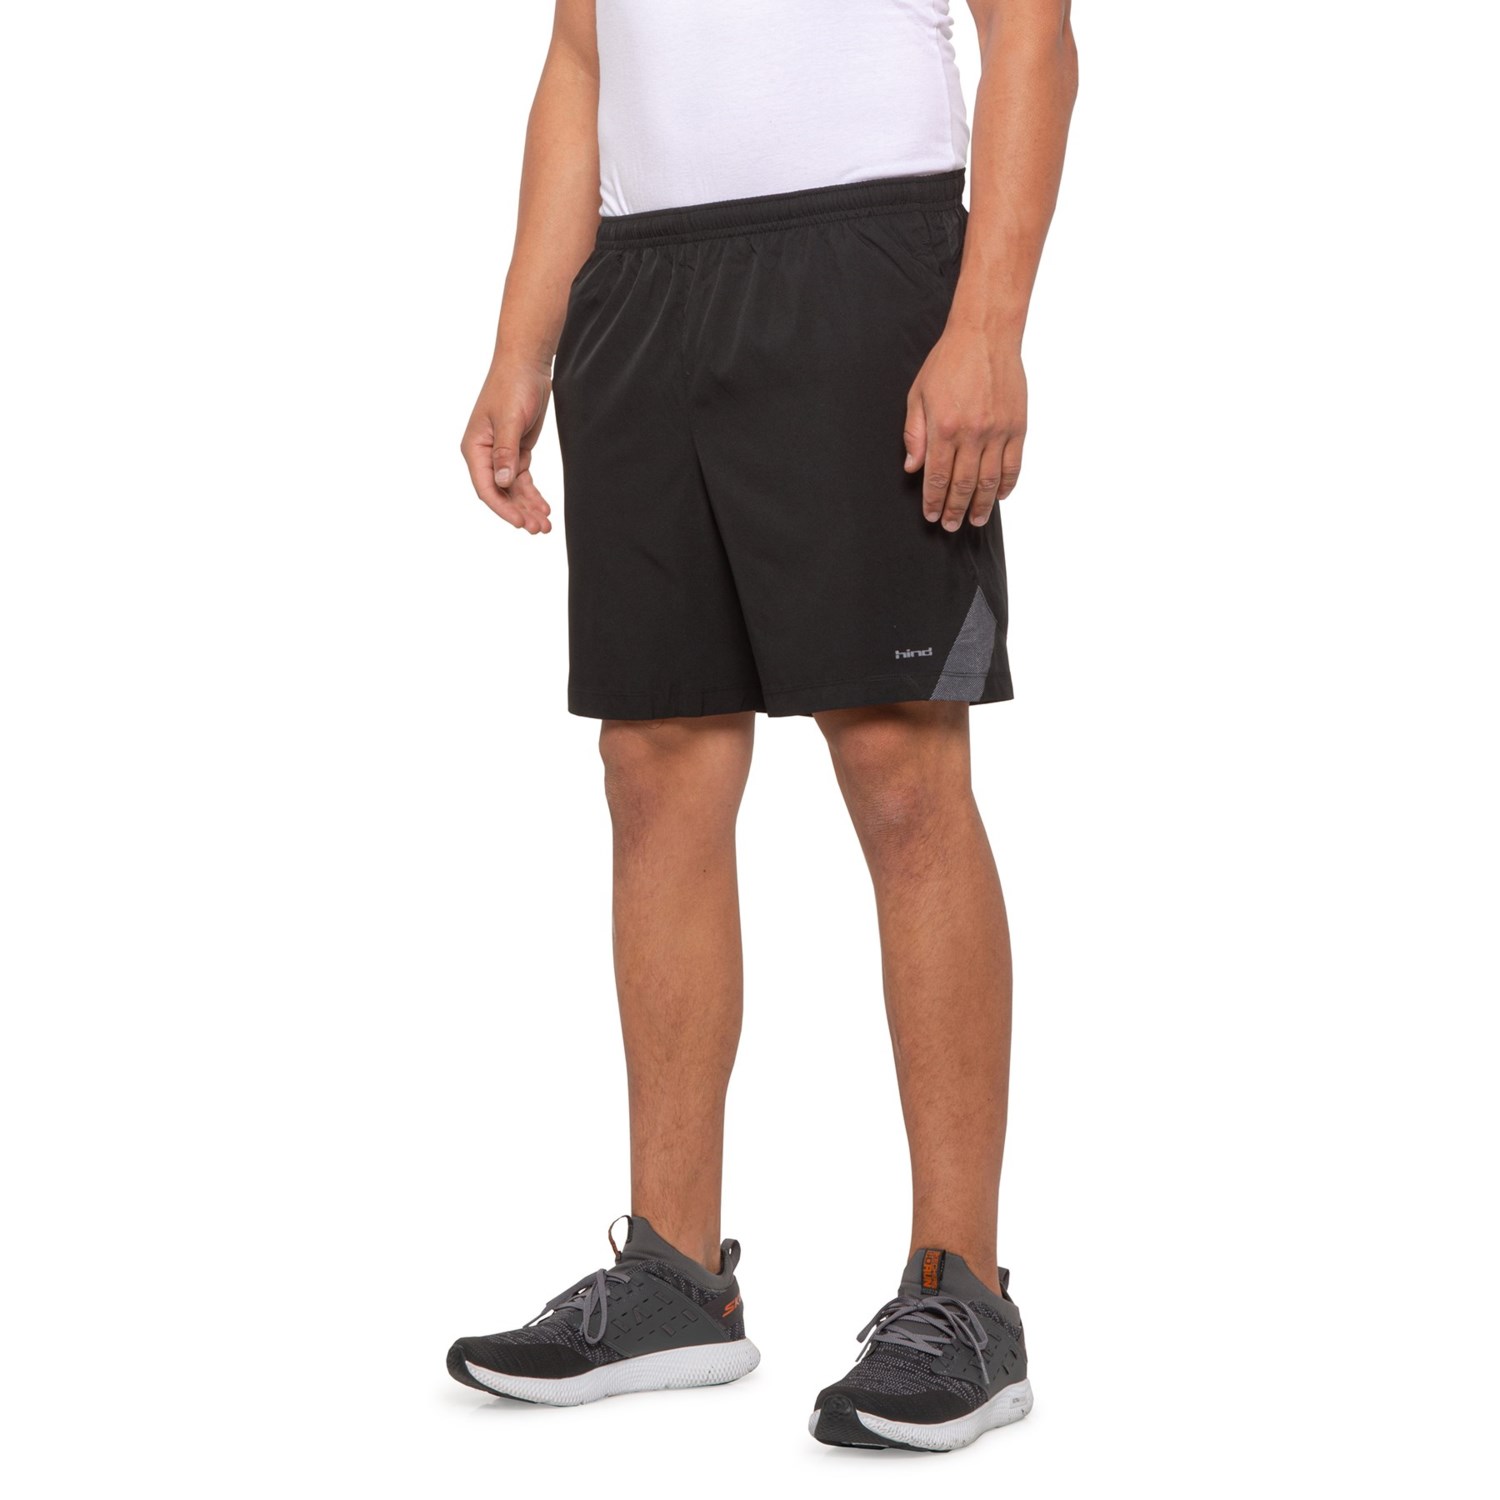 Hind Stretch-Woven Shorts (For Men) - Save 25%